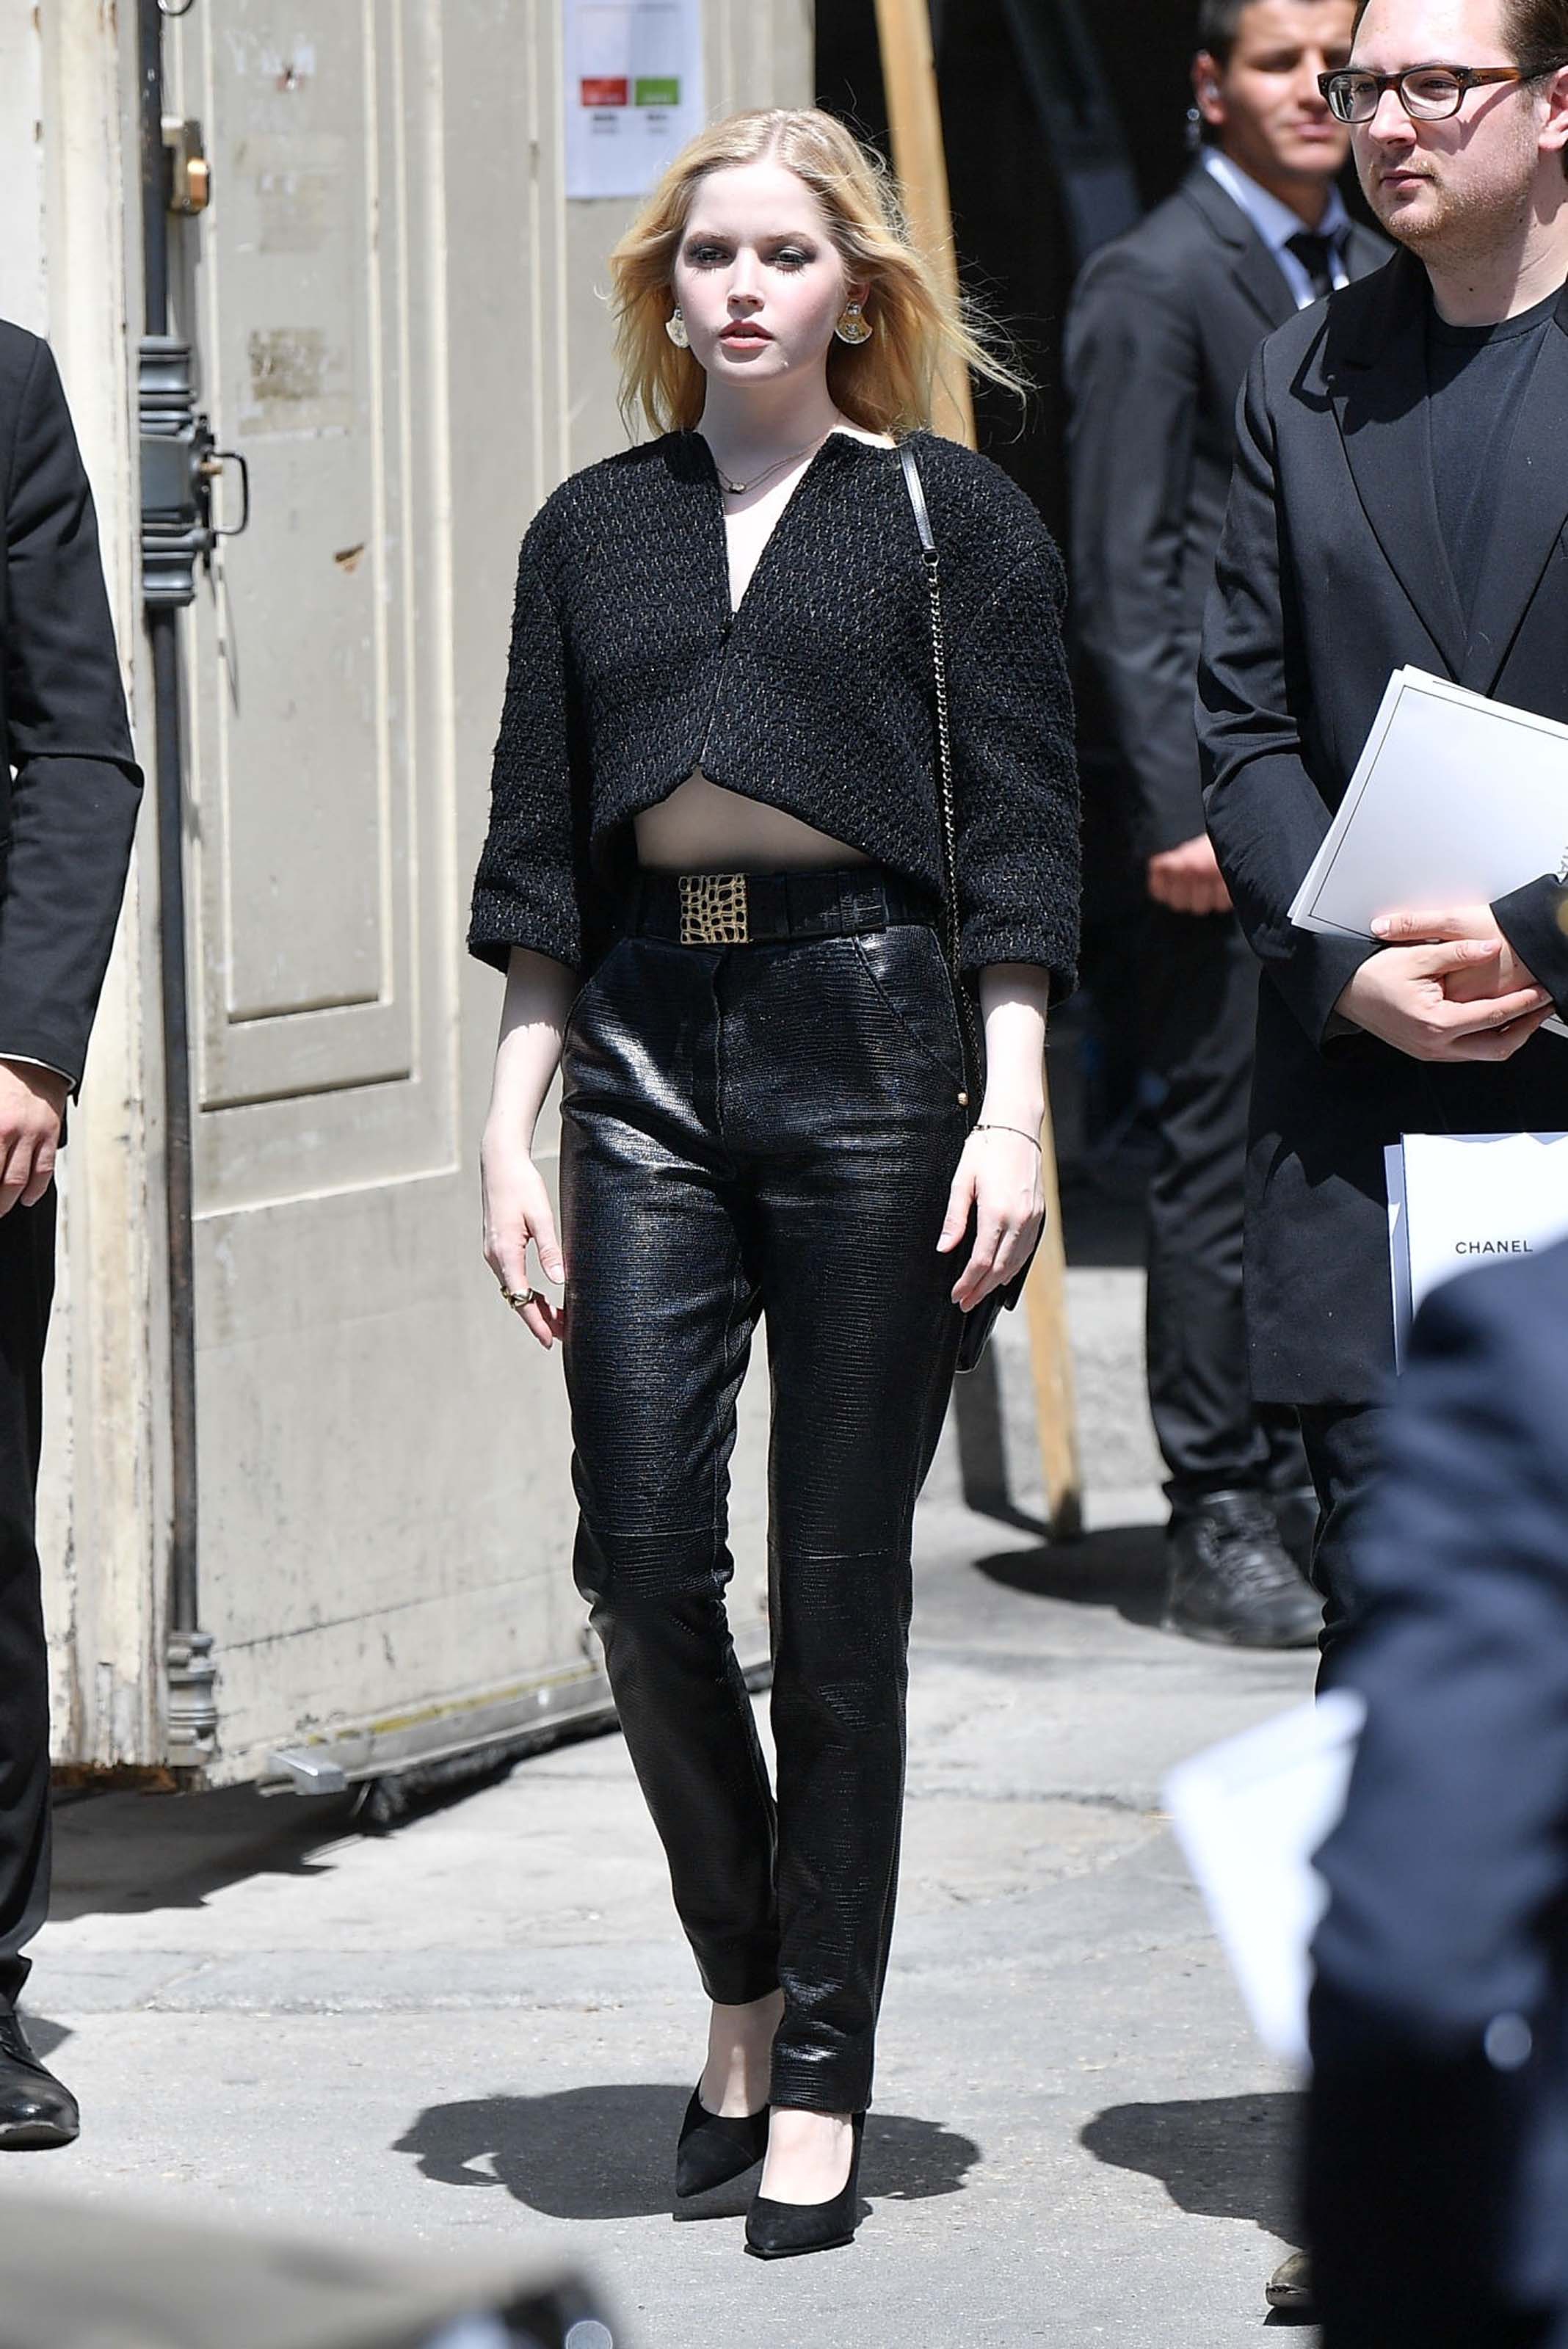 Ellie Bamber attends Chanel Haute Couture Fall/Winter 19/20